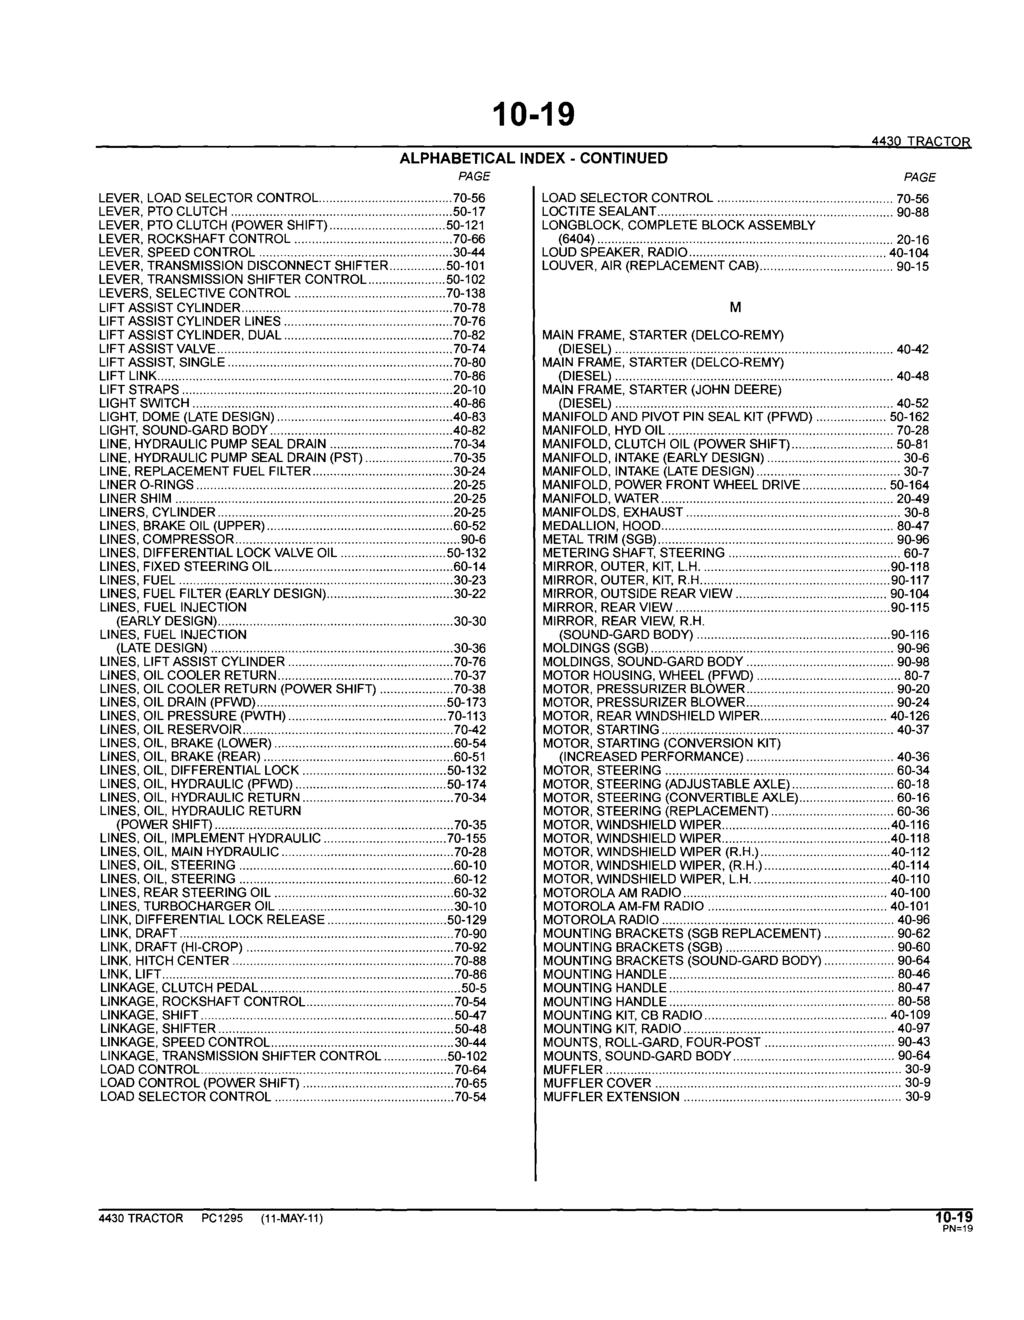 10-19 ALPHABETICAL INDEX - CONTINUED PAGE 4430 TRACTOR LEVER, LOAD SELECTOR CONTROL.... 70-56 LOAD SELECTOR CONTROL... 70-56 LEVER, PTO CLUTCH... 50-17 LOCTITE SEALANT.